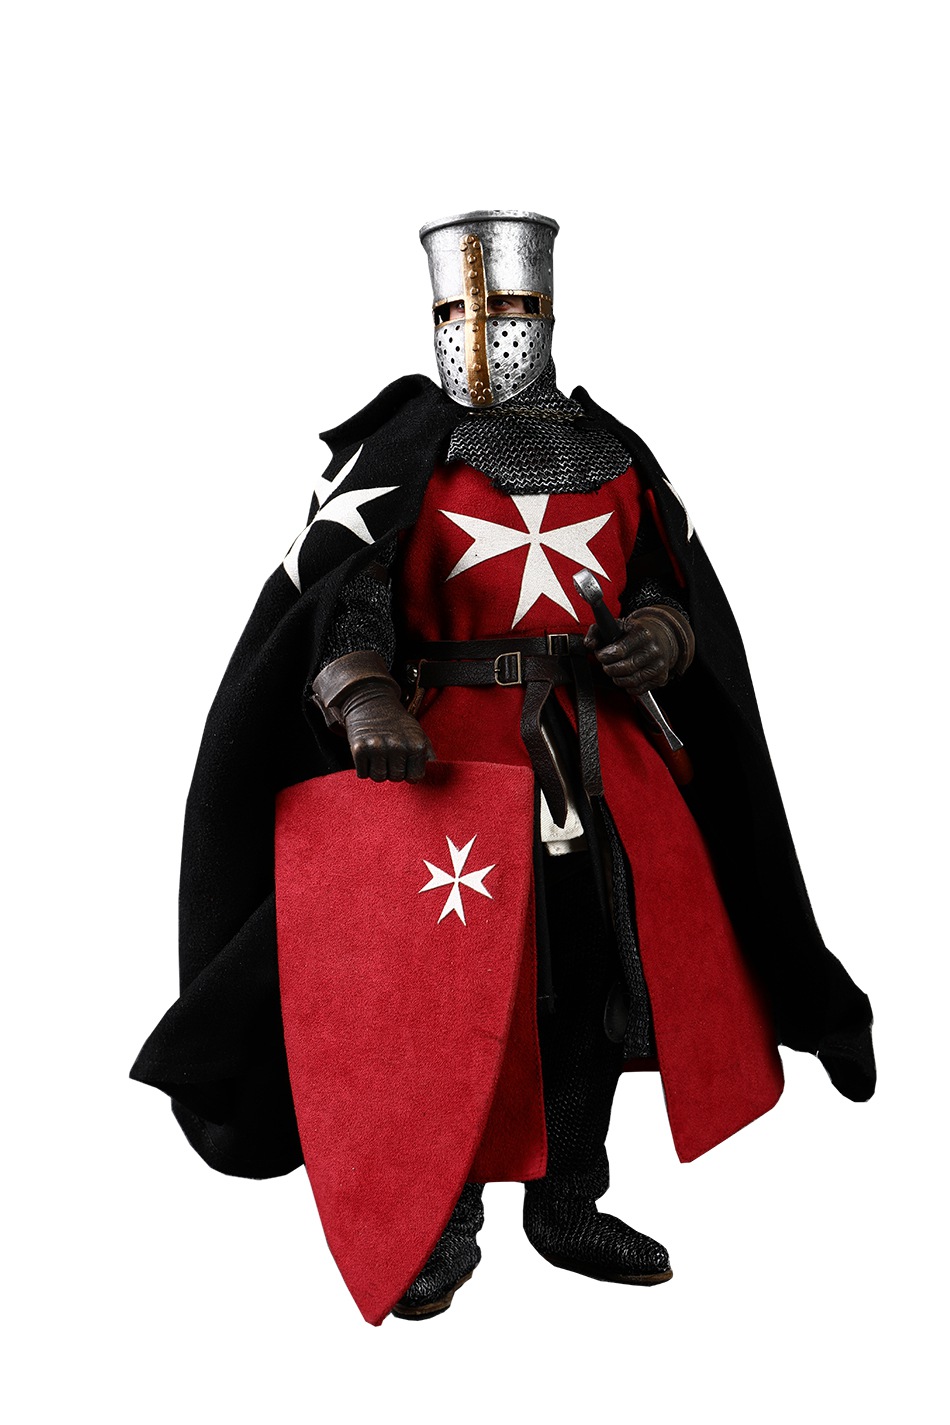 NEW PRODUCT: Fire Phoenix: 1/6 Die-cast Alloy Maltese Hospital Knights/Temple Knights and Sets #FP003/FP004 17592910